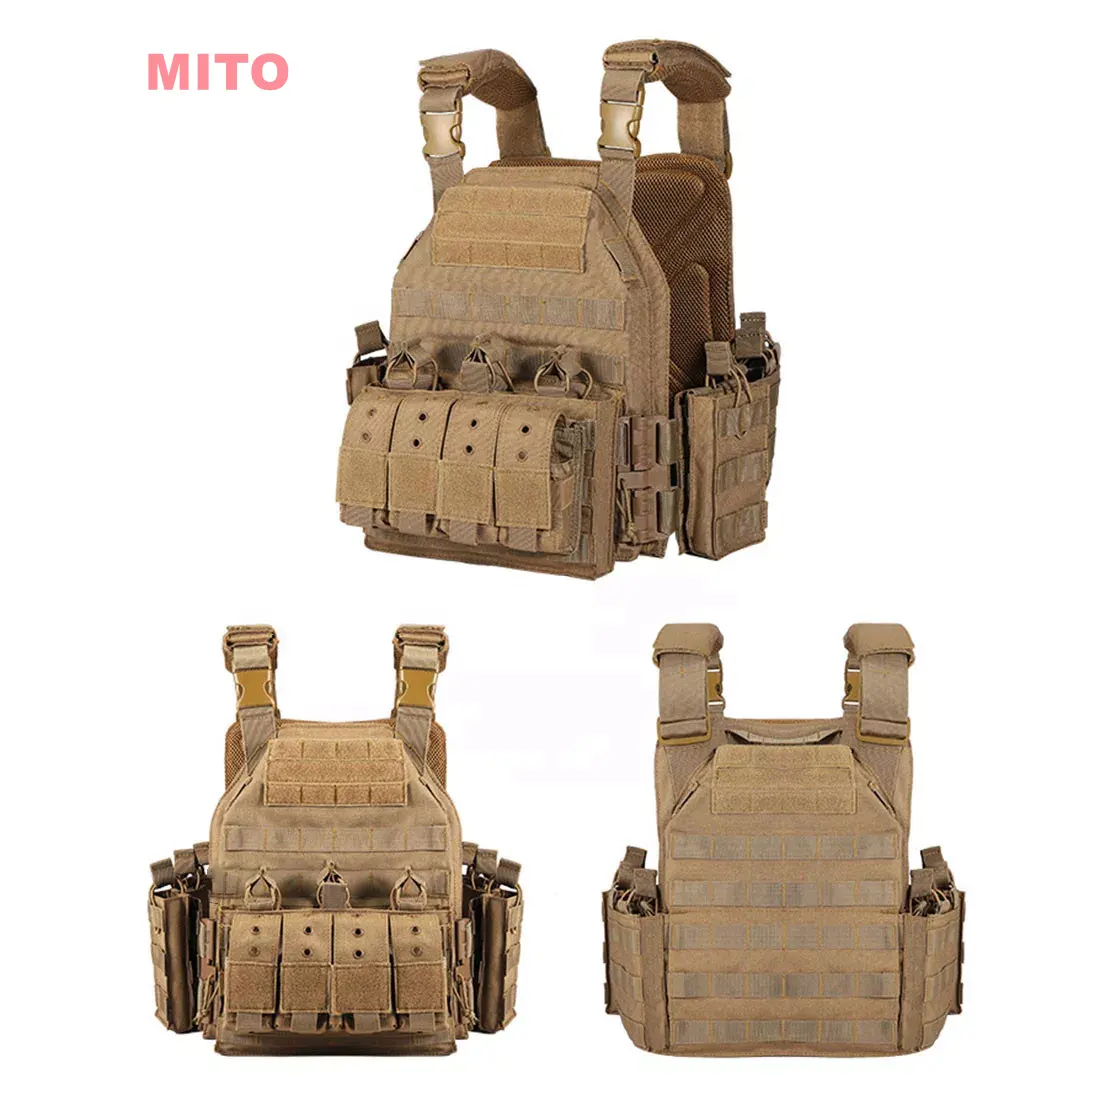 MITO ready to ship Plate Carrier Nylon tactical vests for sale Protective Gear